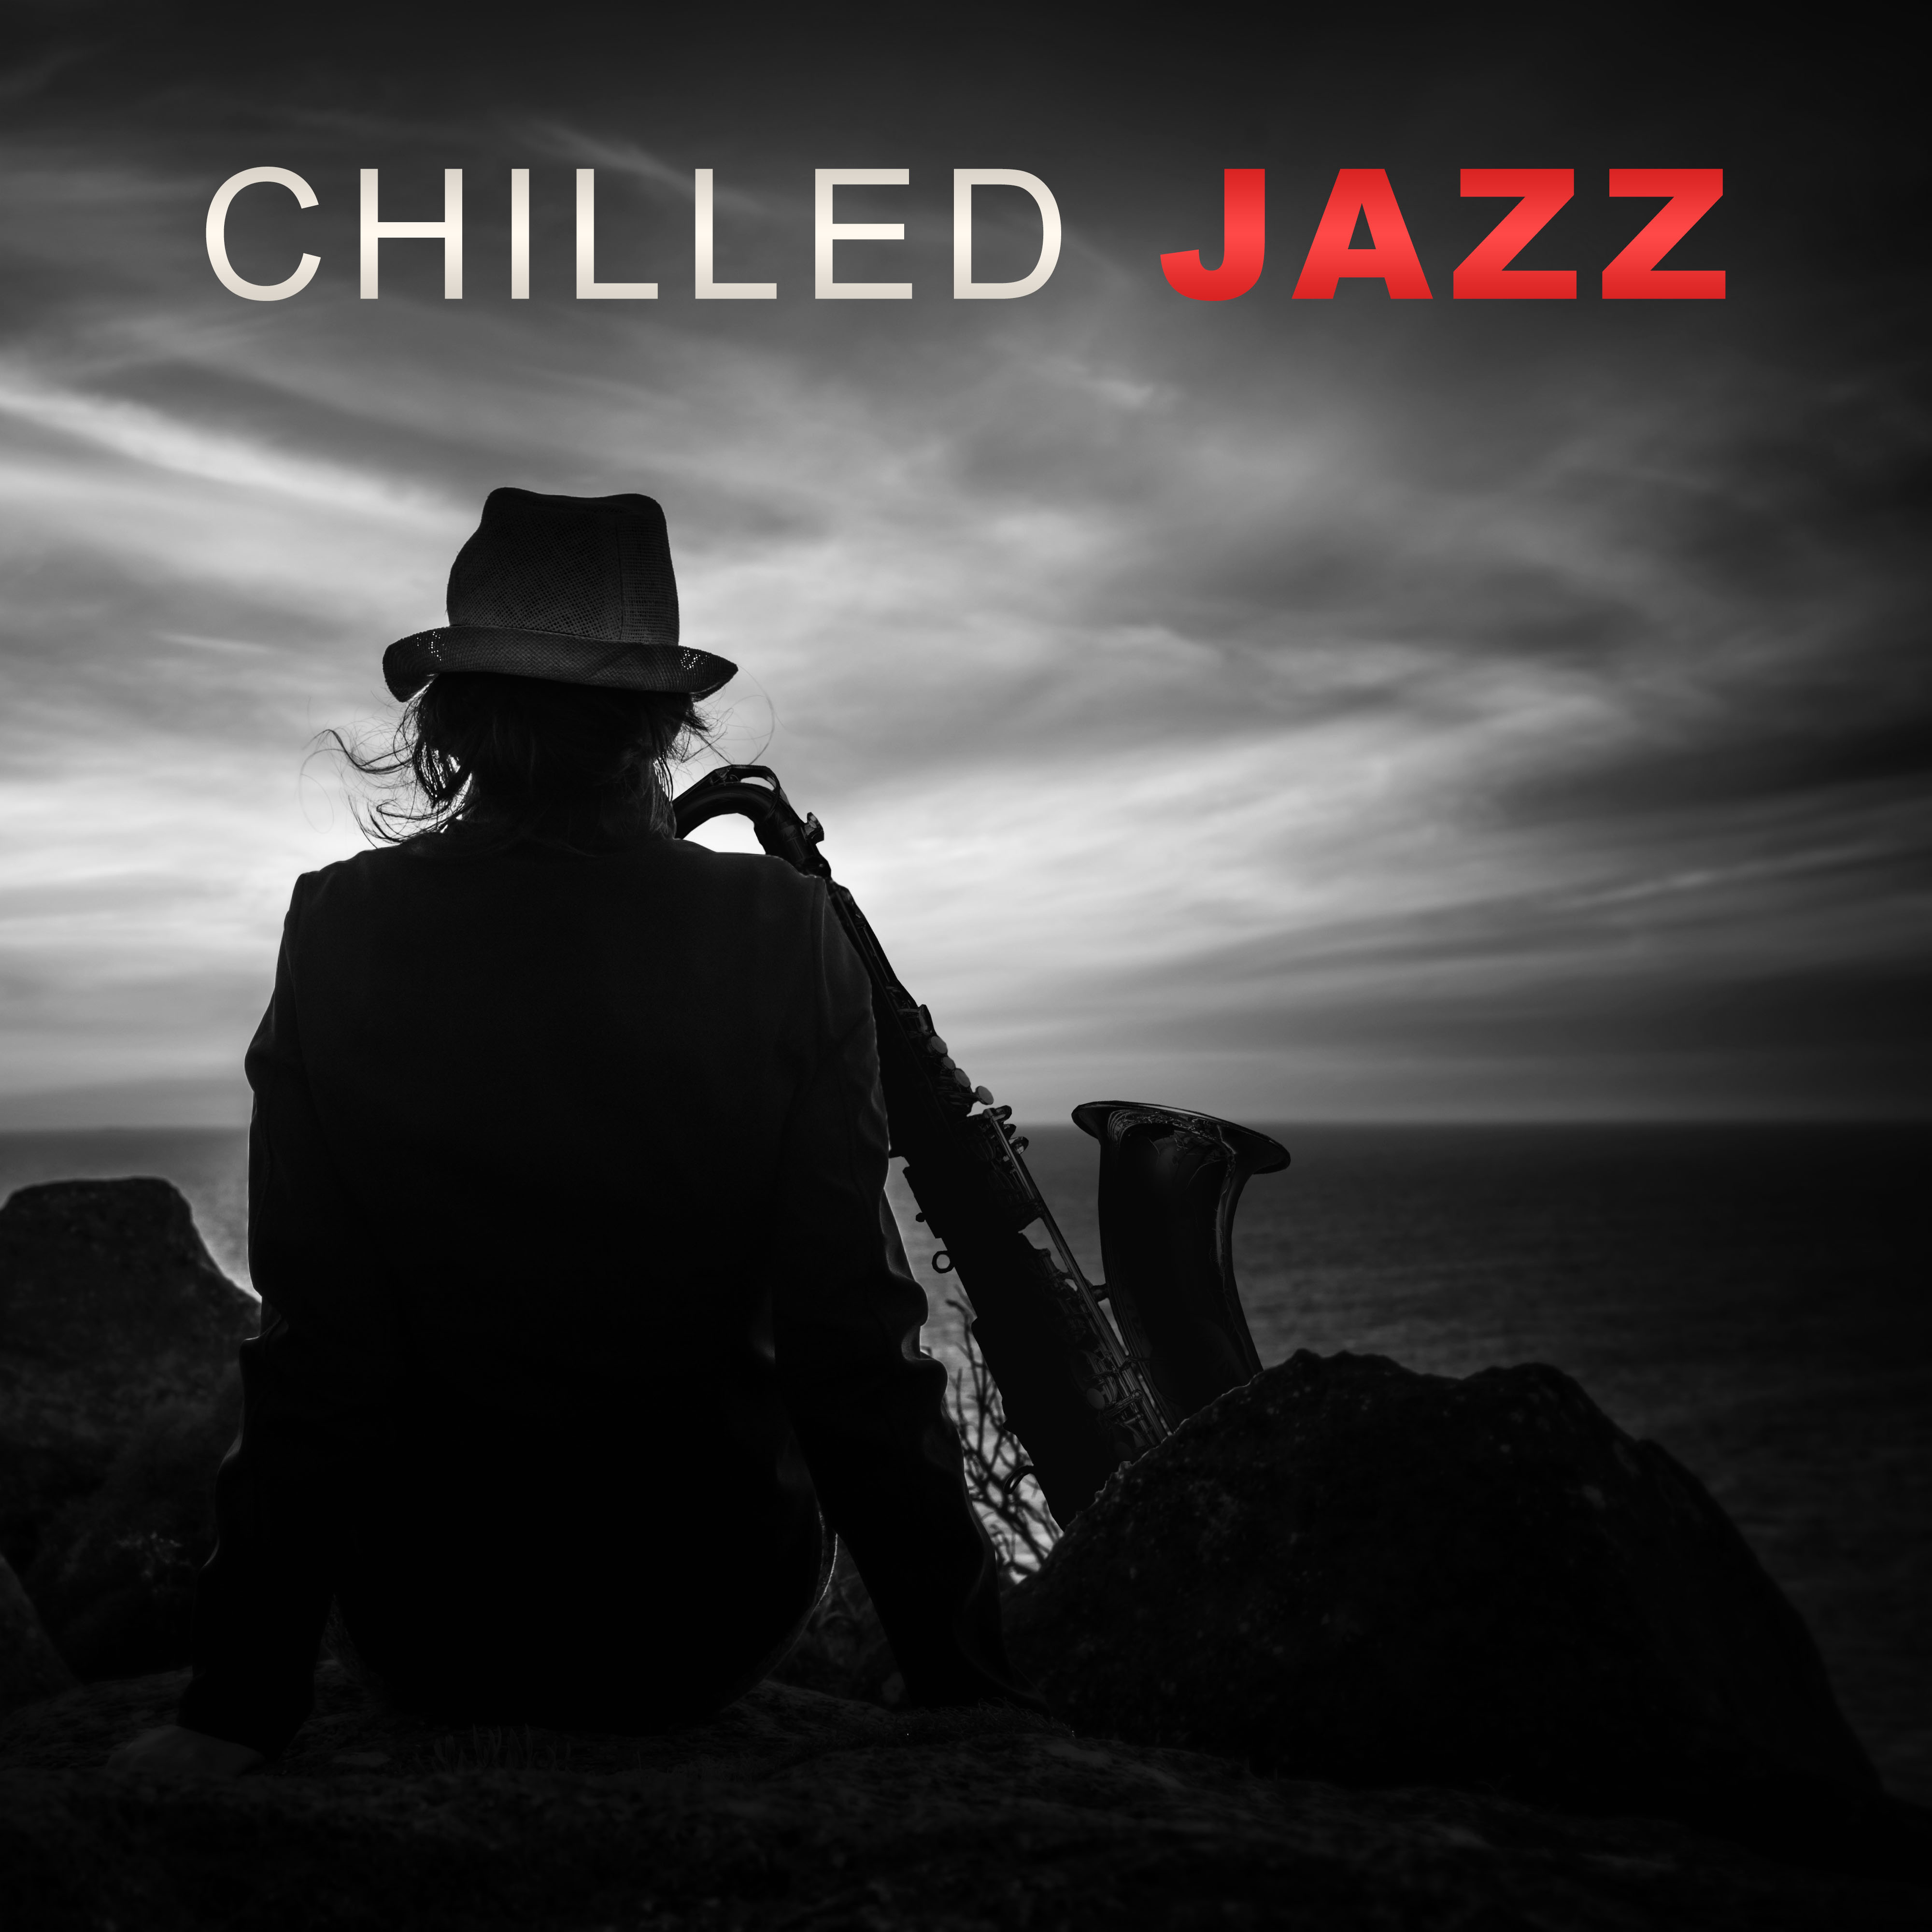 Chilled Jazz – Best Songs of Smooth Jazz, Chilled Jazz, Background Music for Relaxation, Calming Piano Sounds, Jazz Music